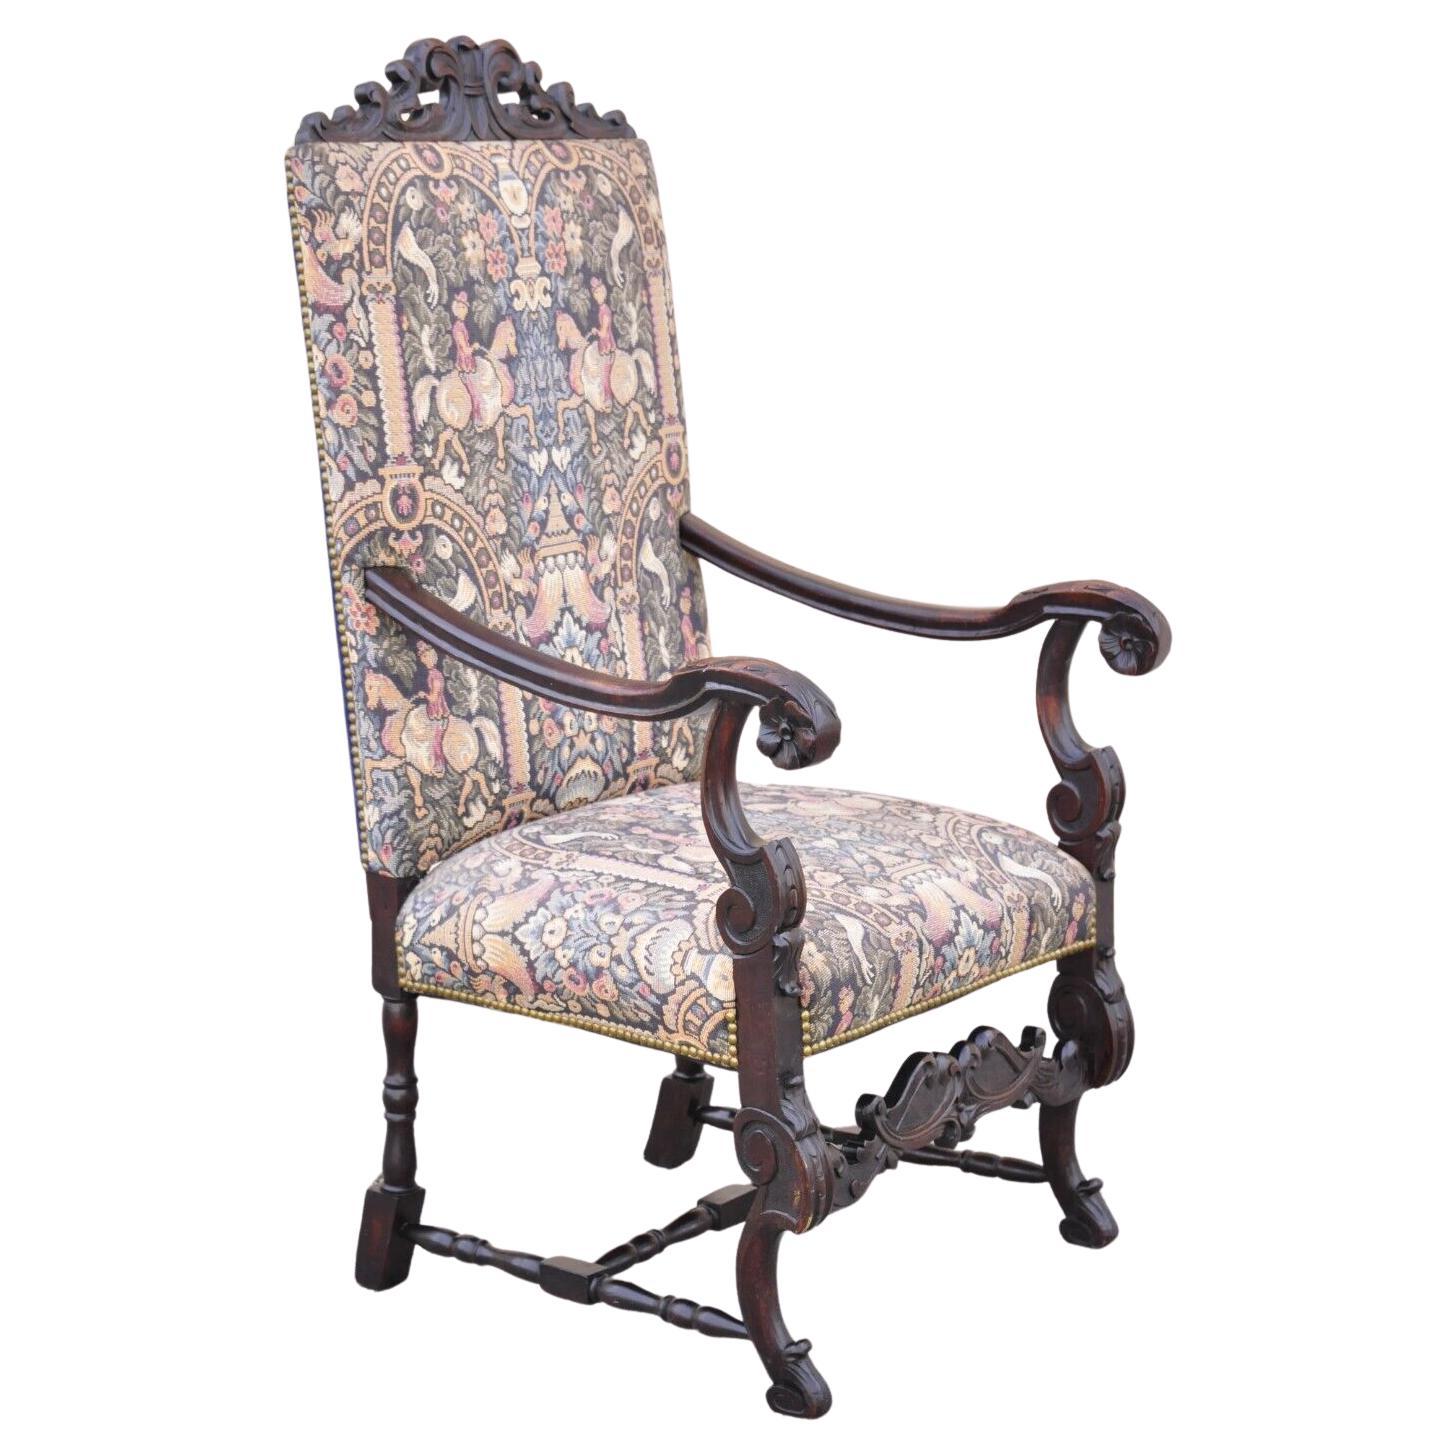 Antique Italian Renaissance Baroque Tapestry Throne Lounge Arm Chair